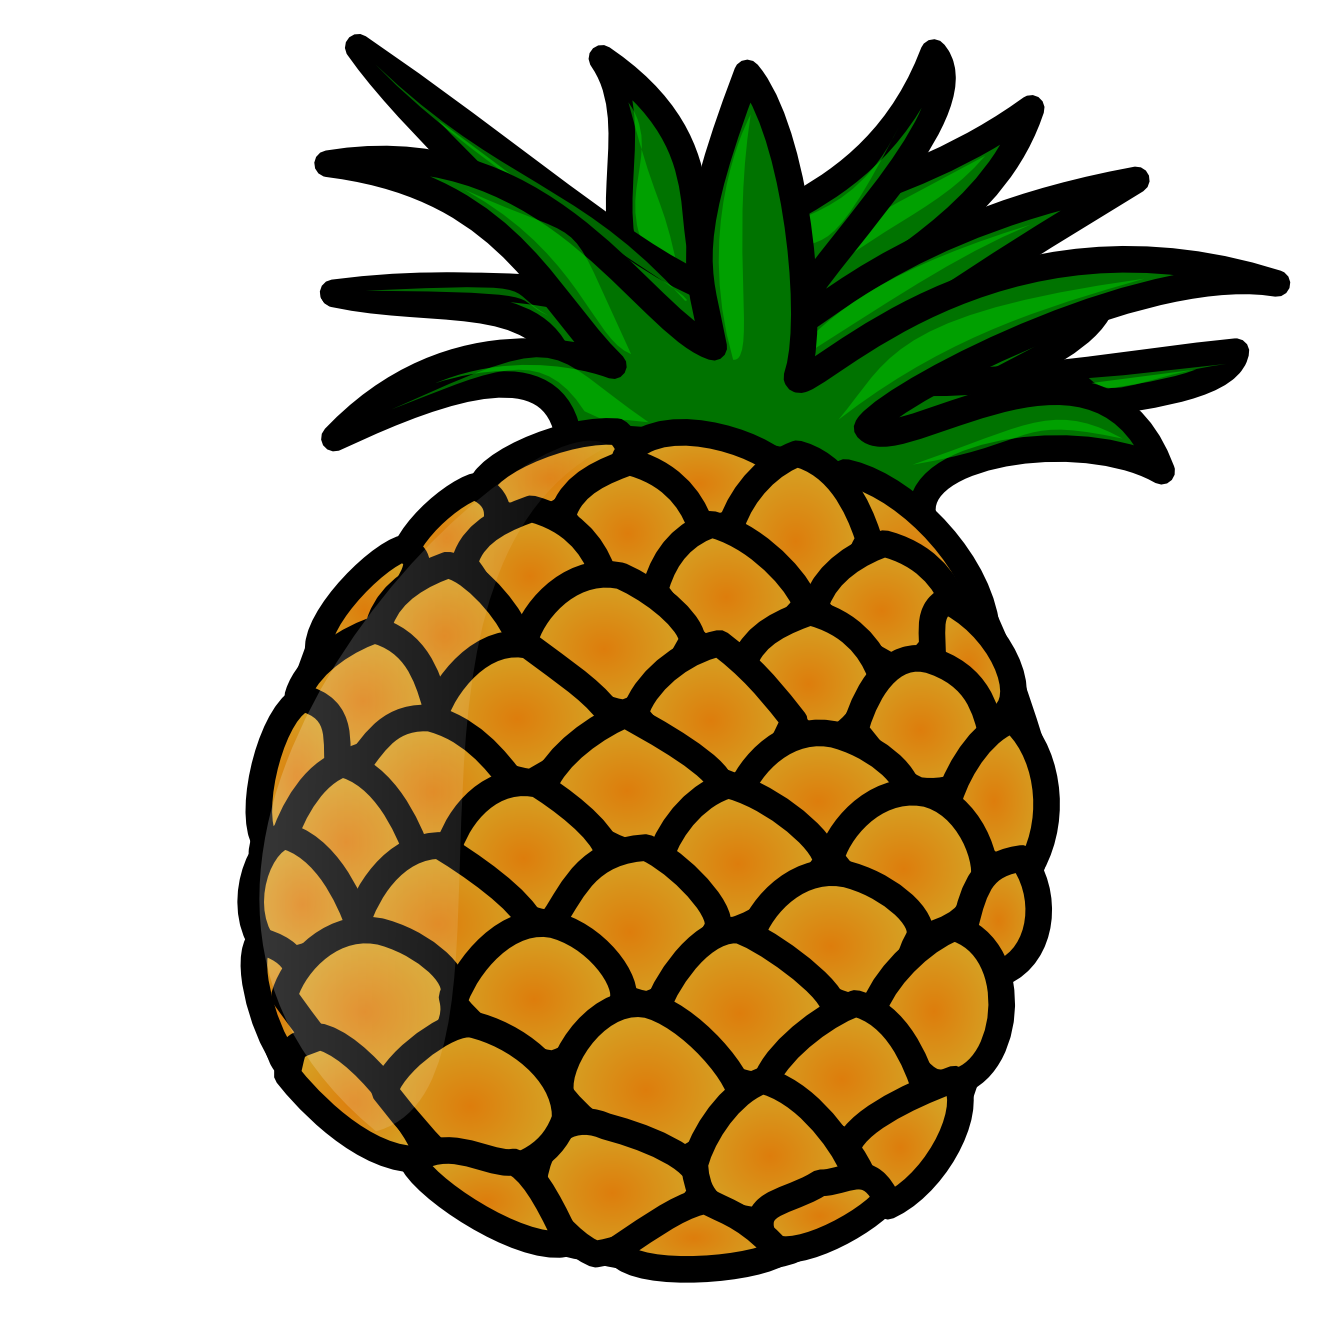 Pineapple clip art free free clipart images